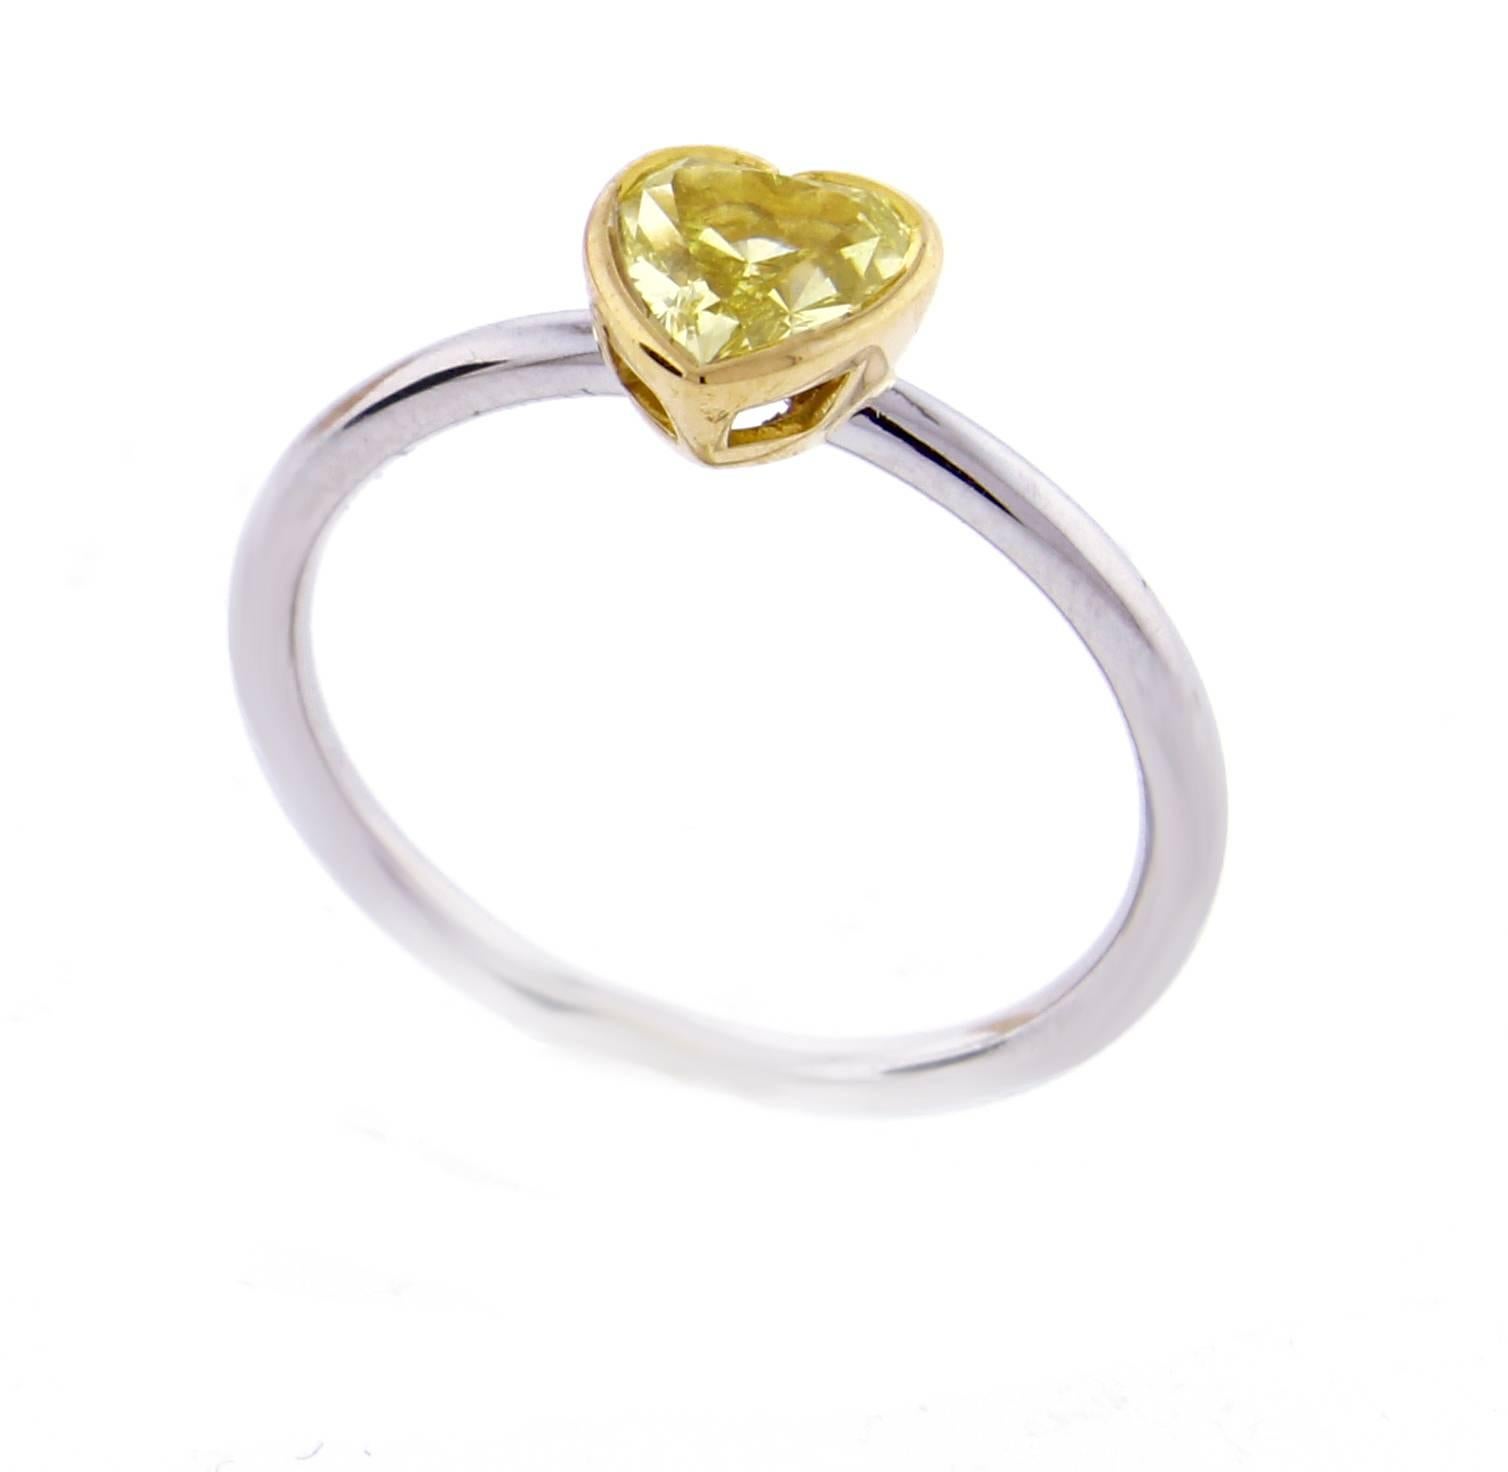 From Tiffany & Co.'s Bezet collection,  a stunning heart shape canary yellow diamond ring. The  .74 carat heart shape diamond is fancy intense yellow and internally flawless. Set in a Bezet of 18 kart gold on a platinum band. size 7
